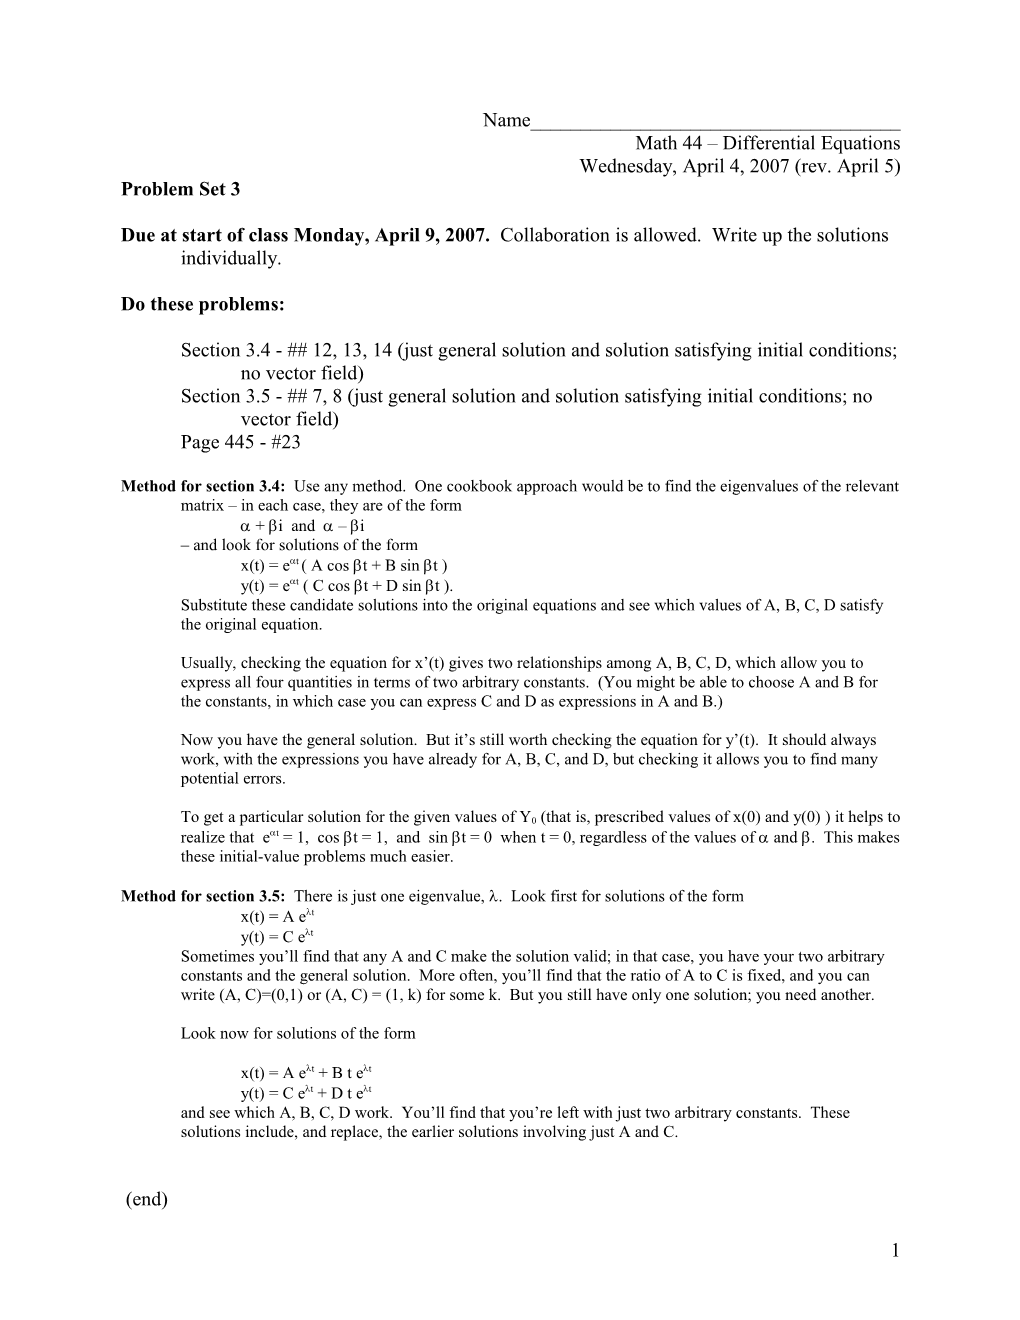 Math 44 Differential Equations